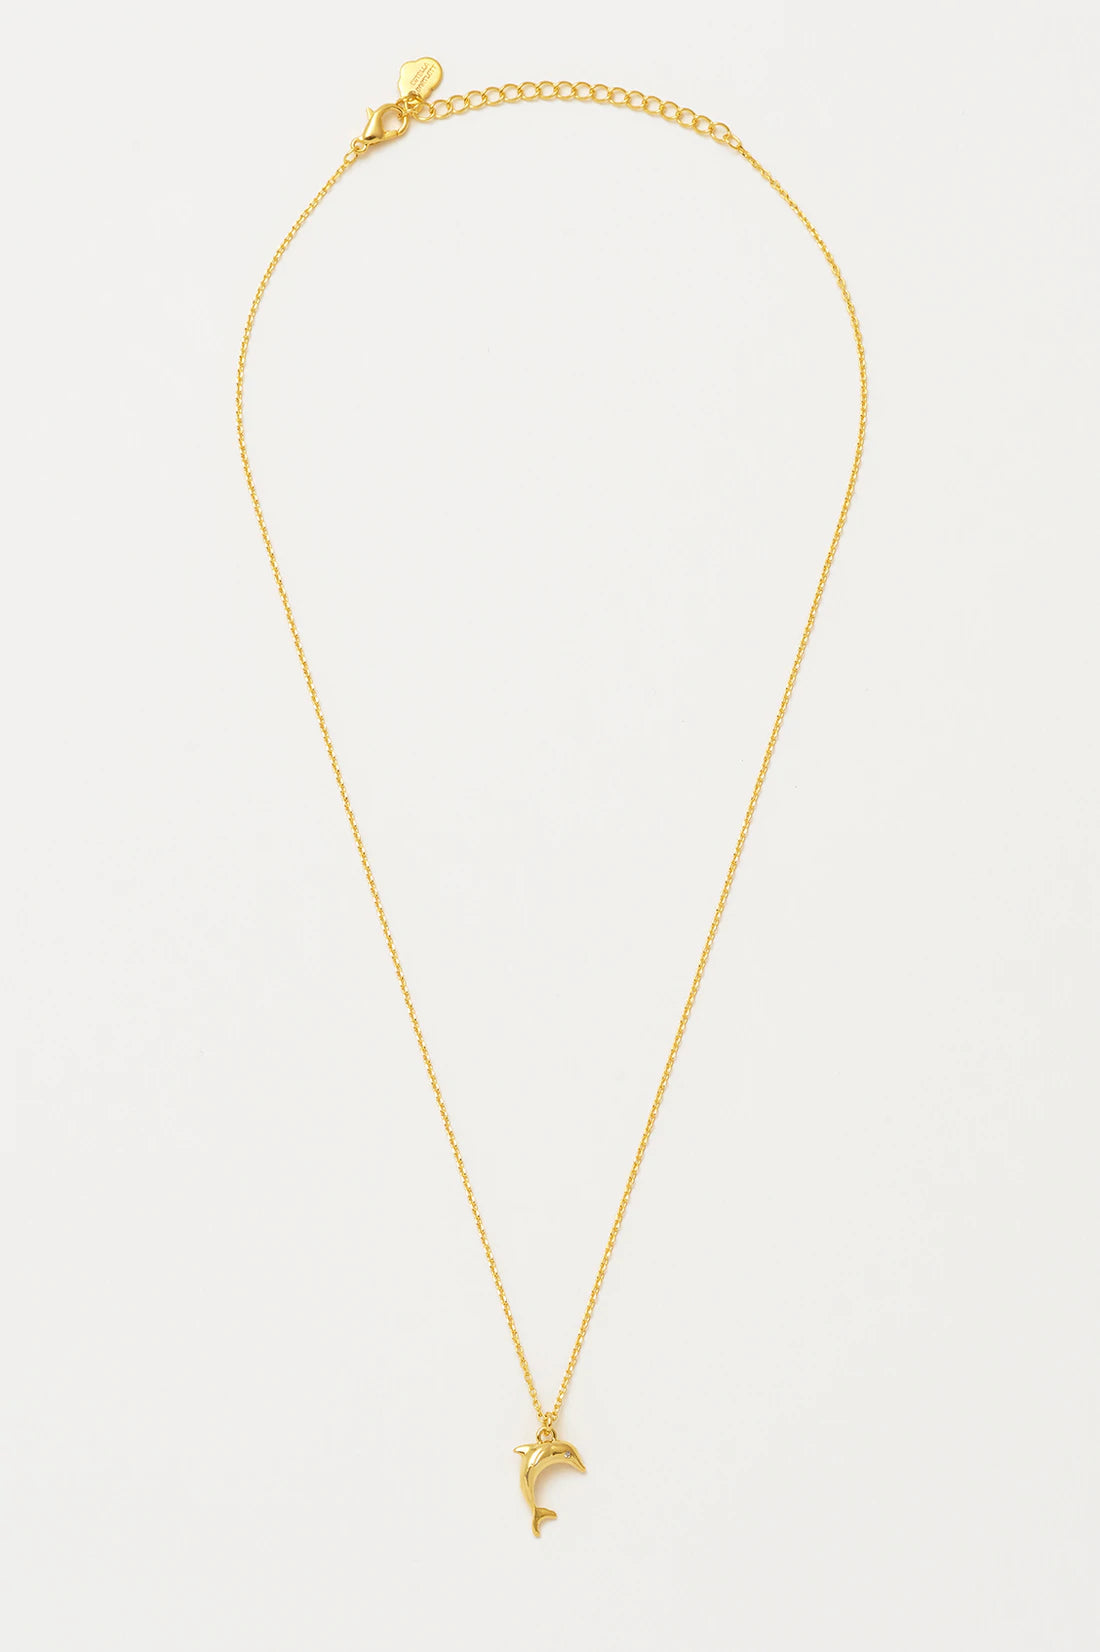 Smile Love Dream Dolphin Pendant Necklace: Gold Plated